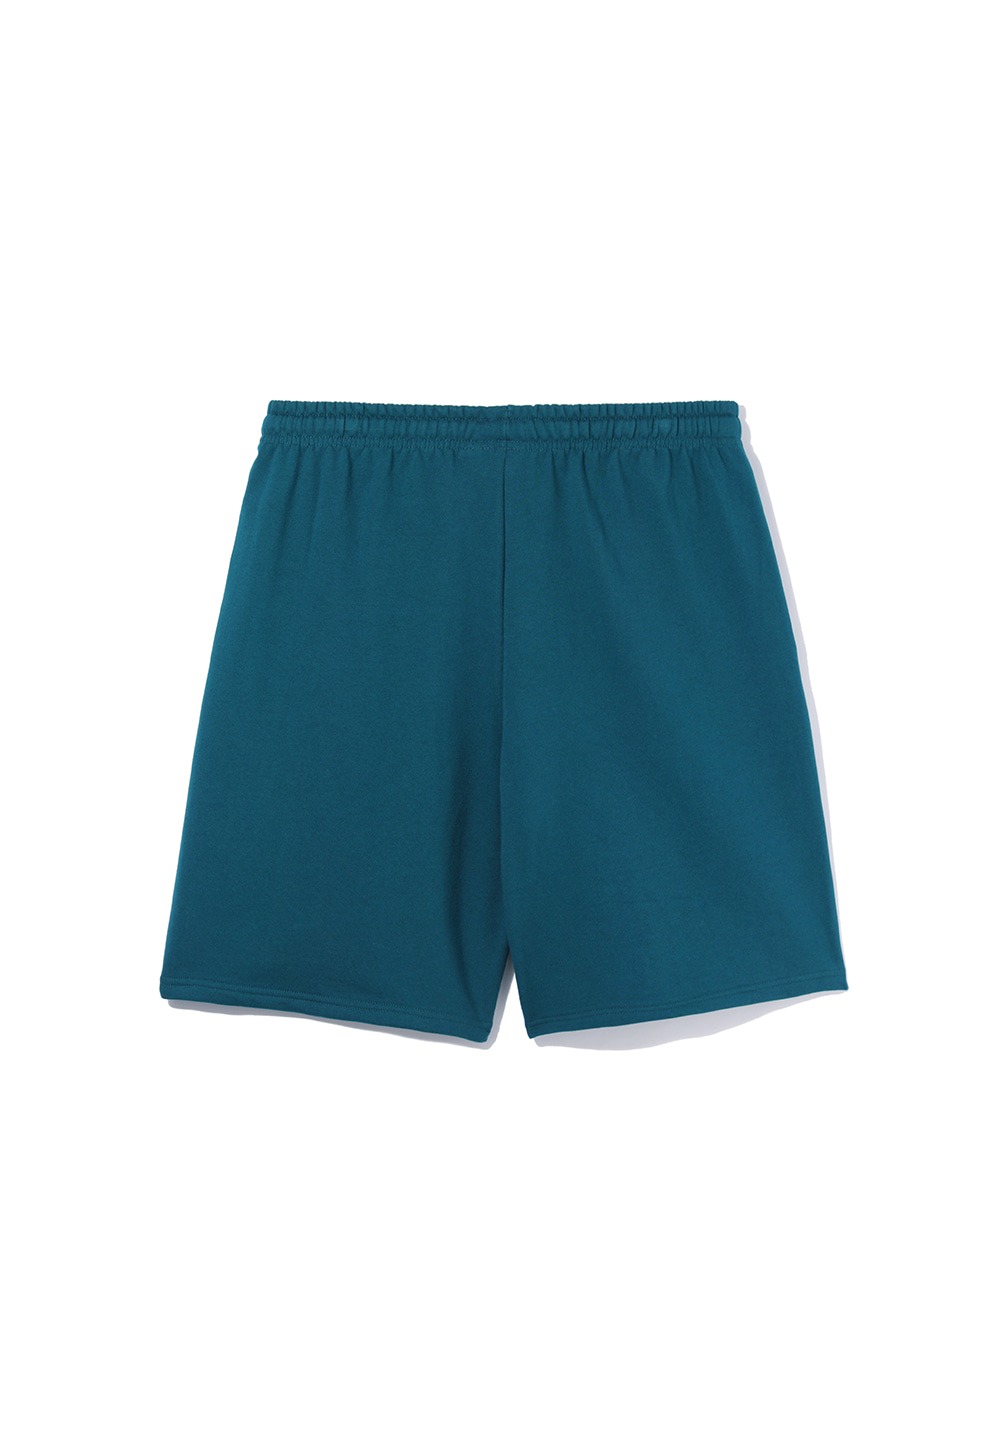 Signature relax half pants - TURQUOISE